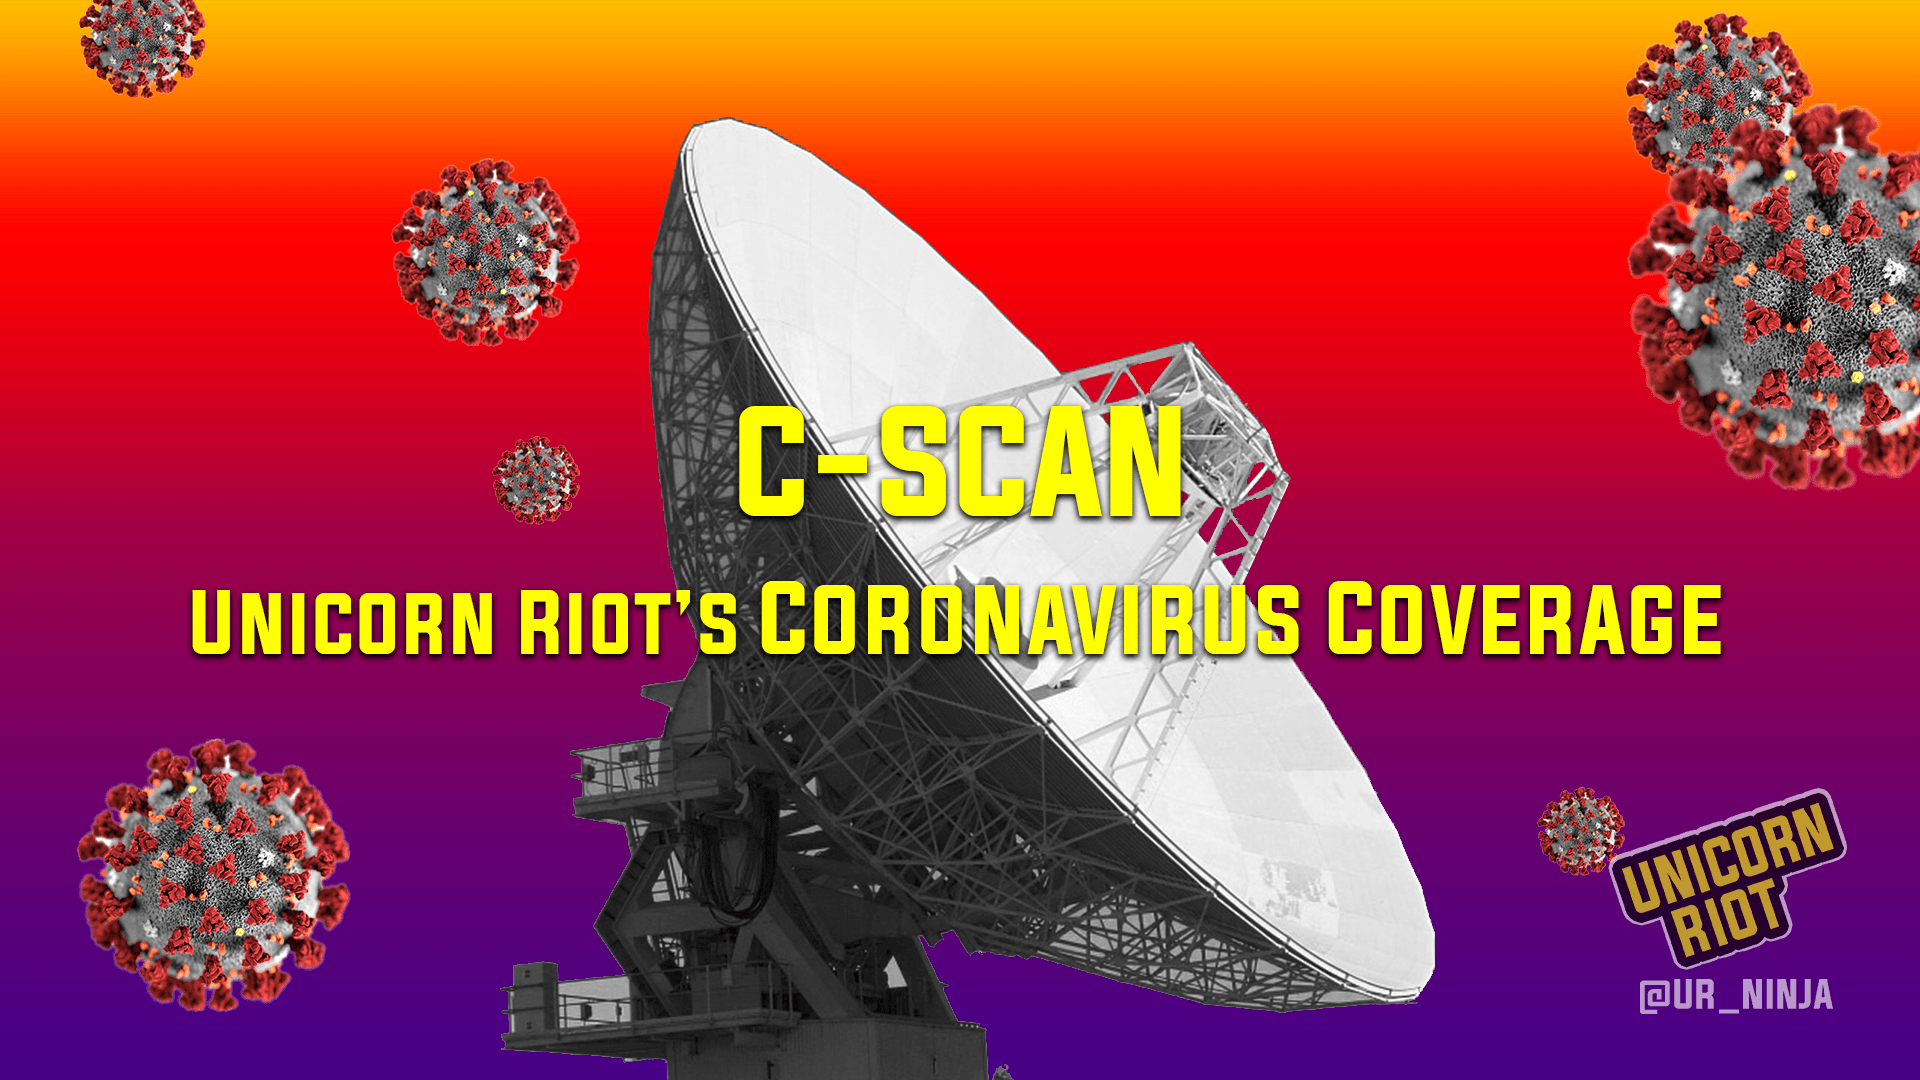 Text: "C-SCAN Unicorn Riot's Coronavirus Coverage. Image: a black-and-white radio dish scanning for information over a gradient background blended from yellow on the top to red to blue-violet on the bottom. seven coronavirus particles are floating in the air surrounding the dish.